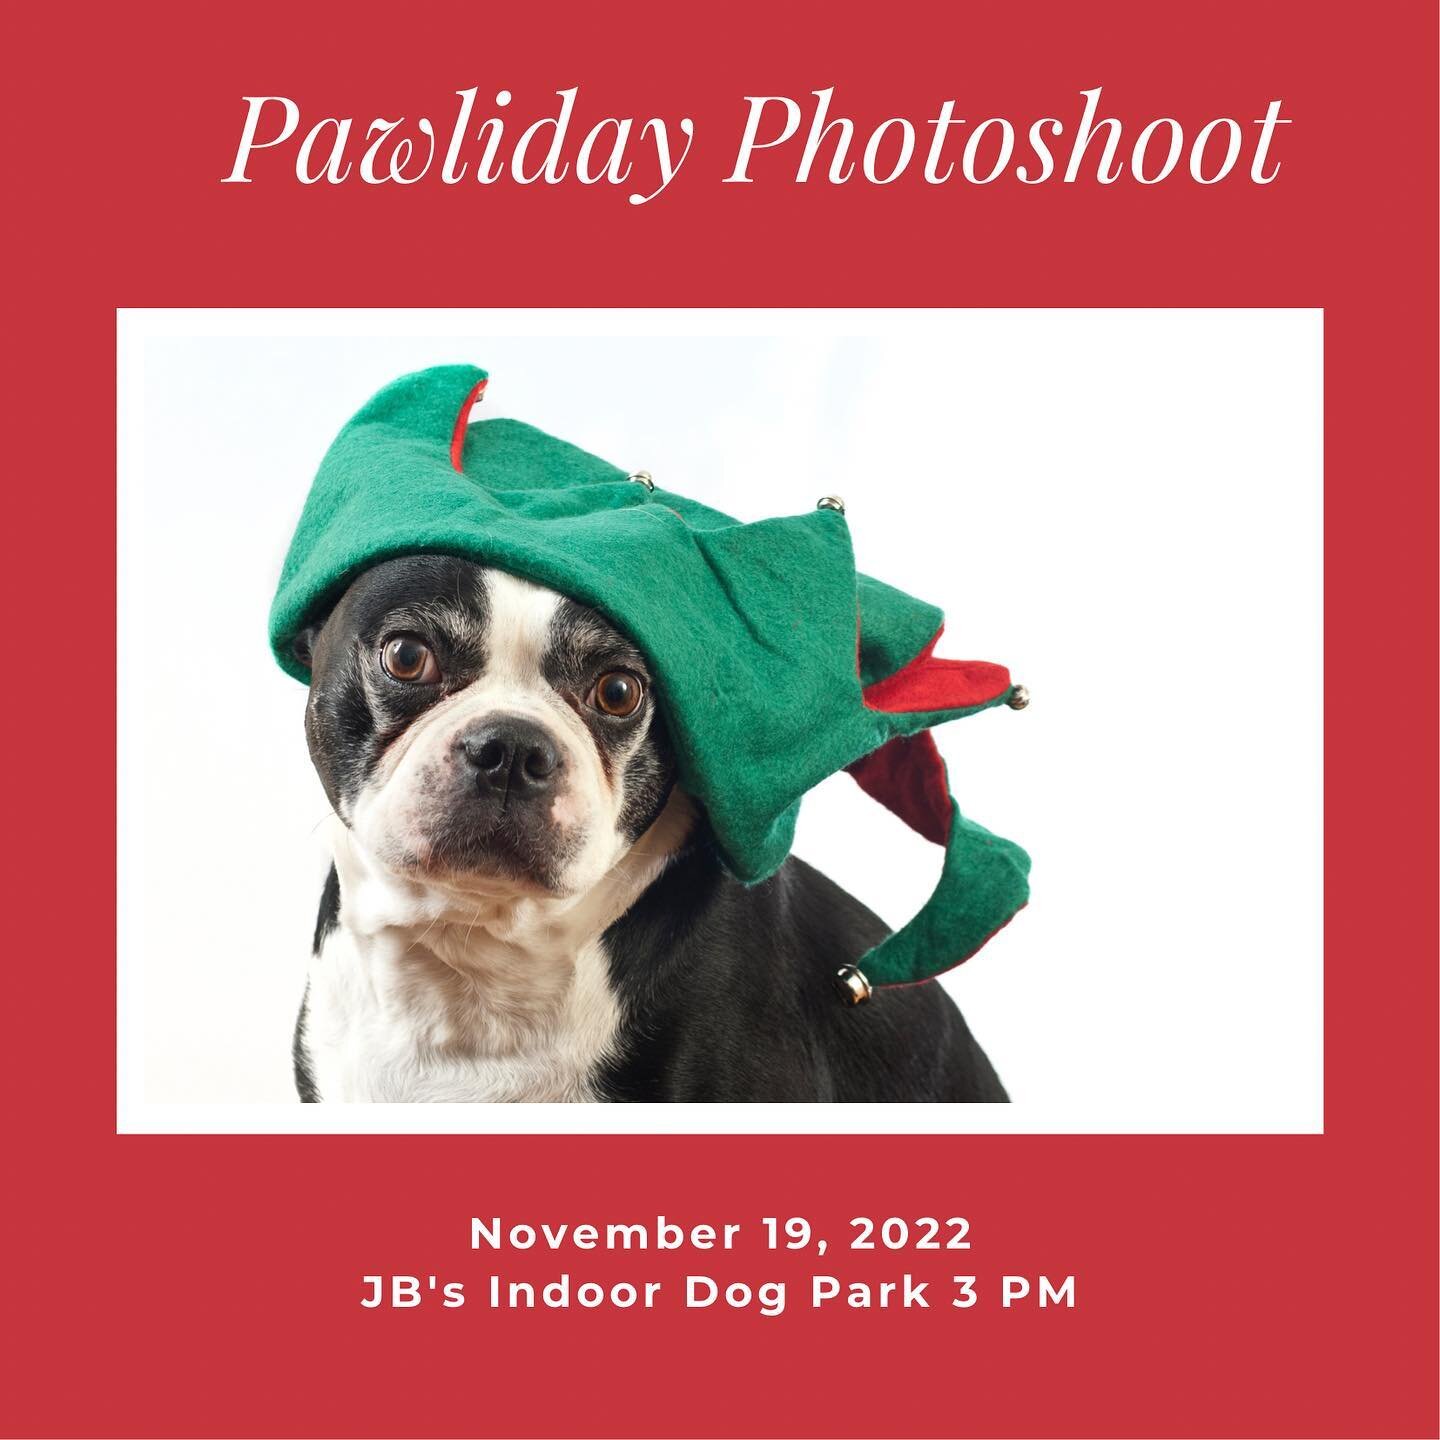 Our Pawliday Photoshoot is going to be great this year and you don't want to miss out. Sign up for the shoot ends at 5 pm Friday night. After that you will have to pay the day of rate so you definitely want to get in early. 

As with all our indoor m